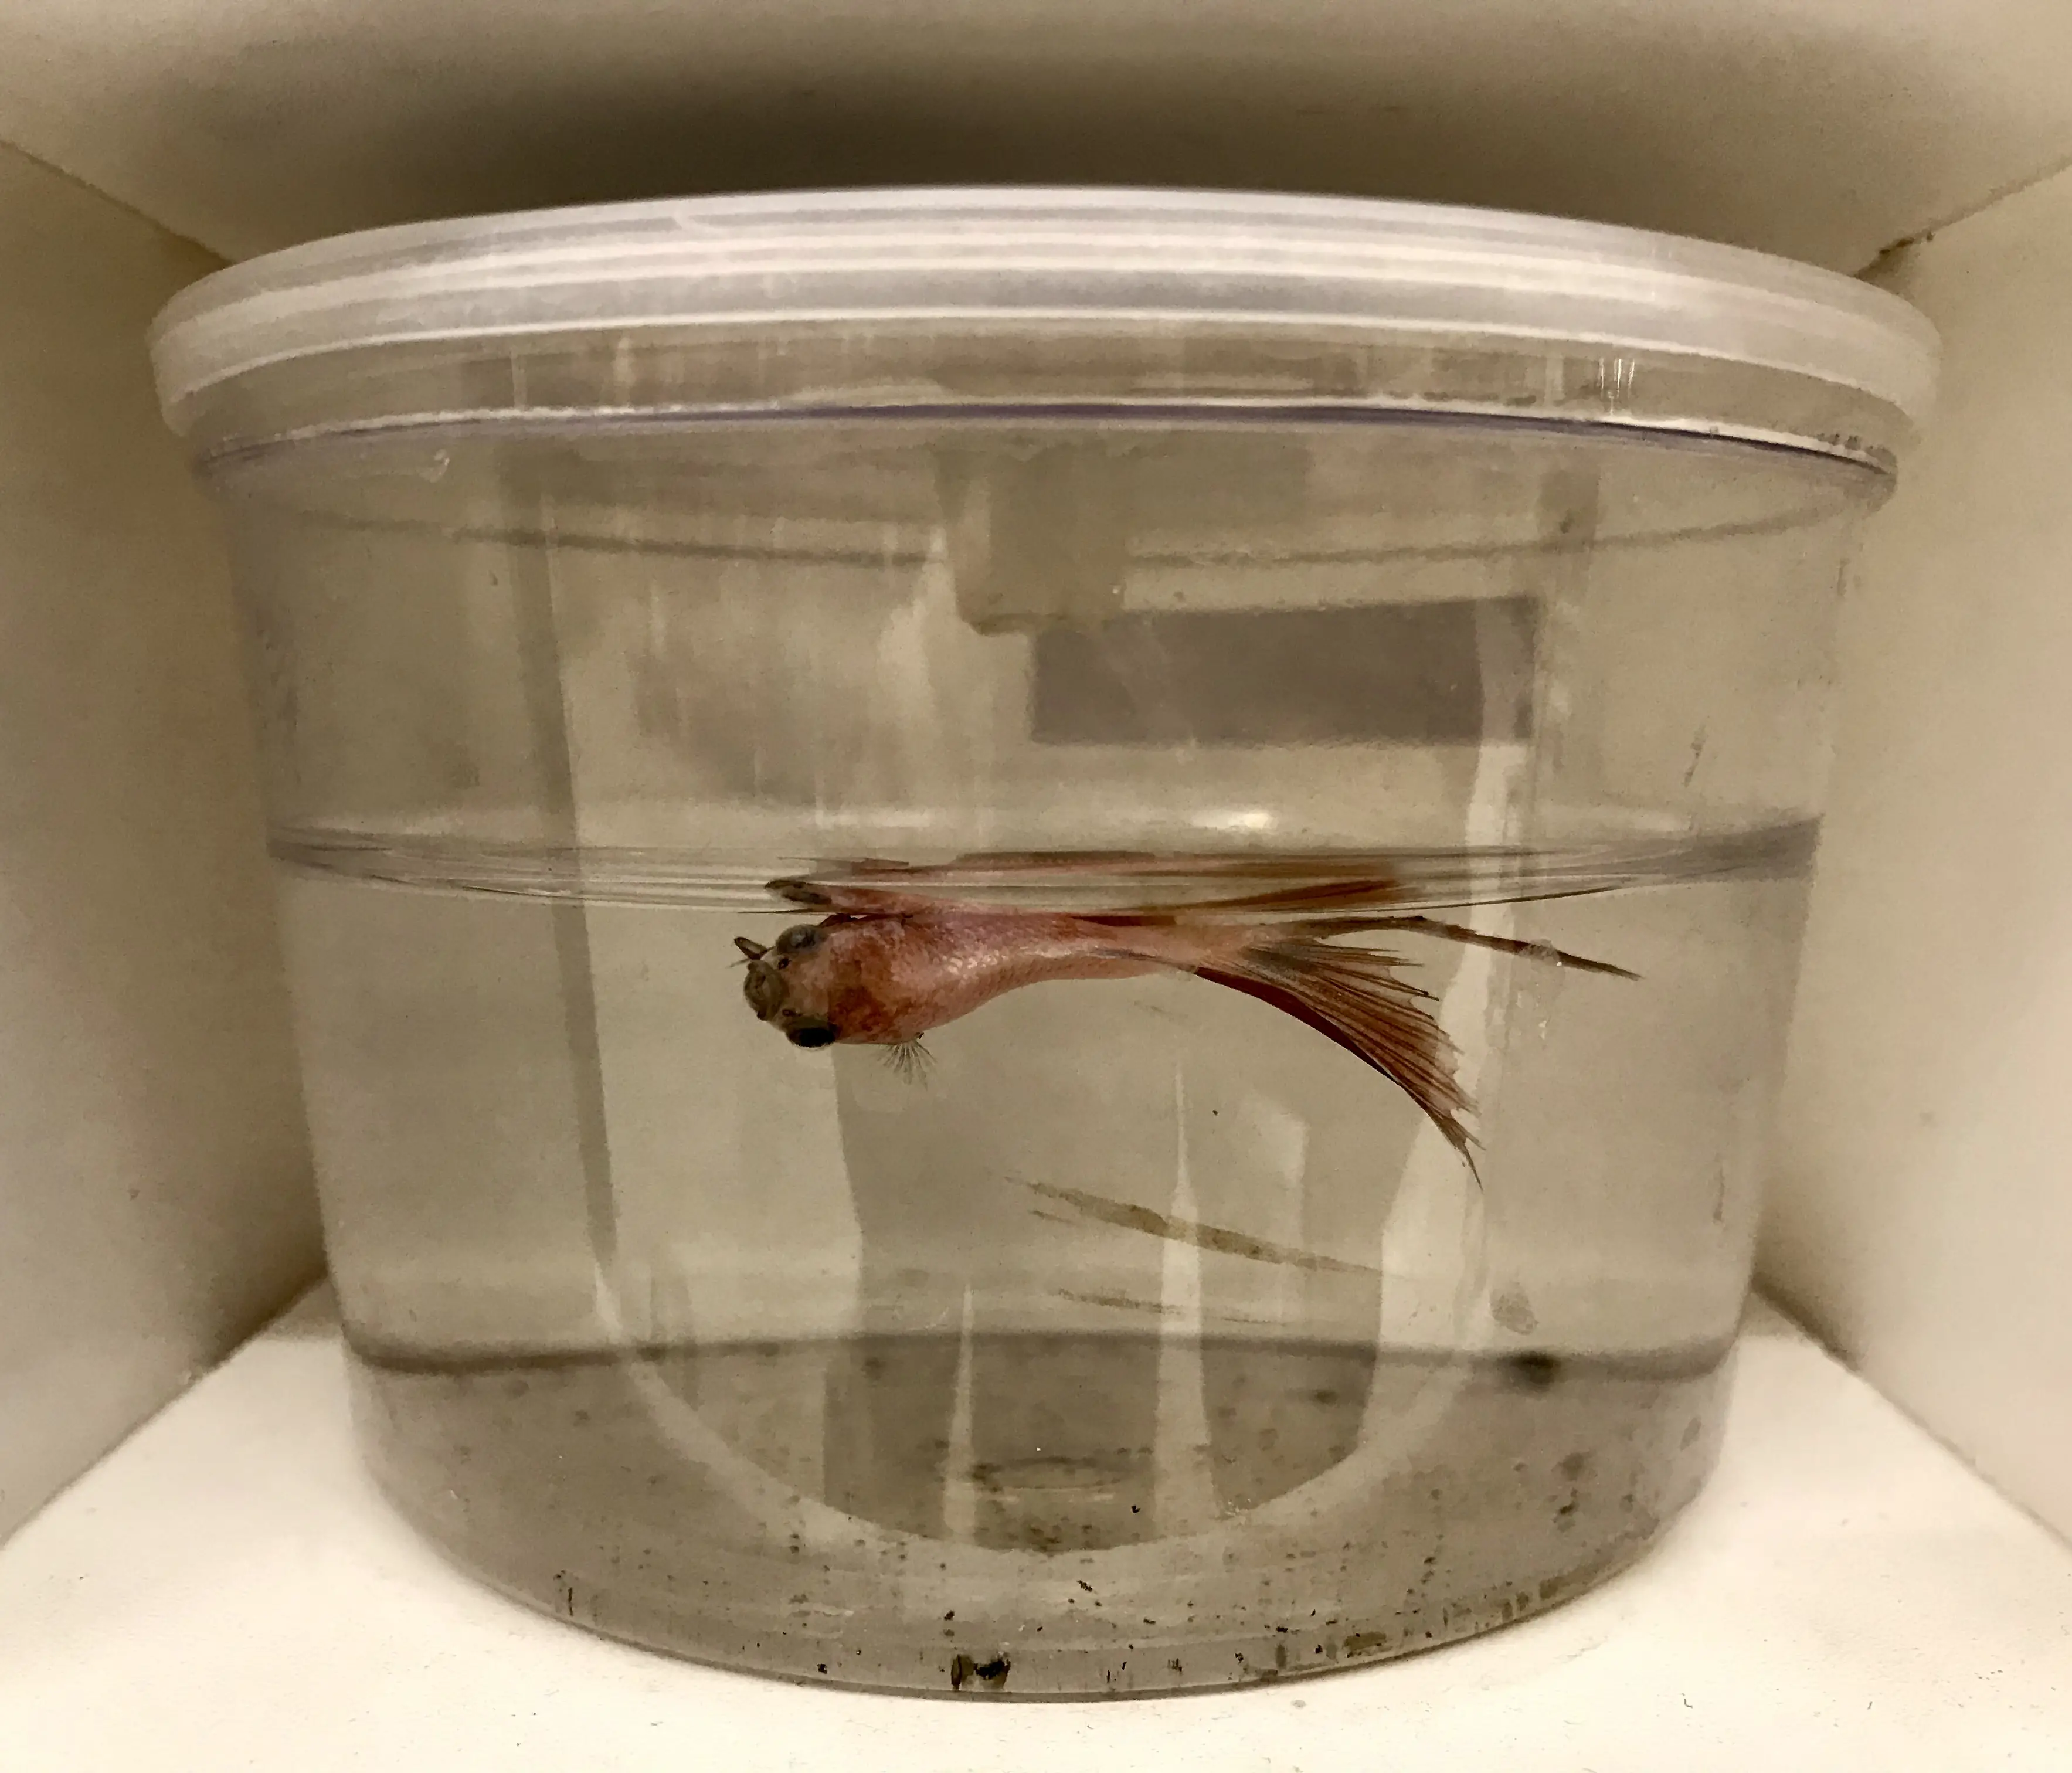 What Does a Dead Betta Fish Look Like?